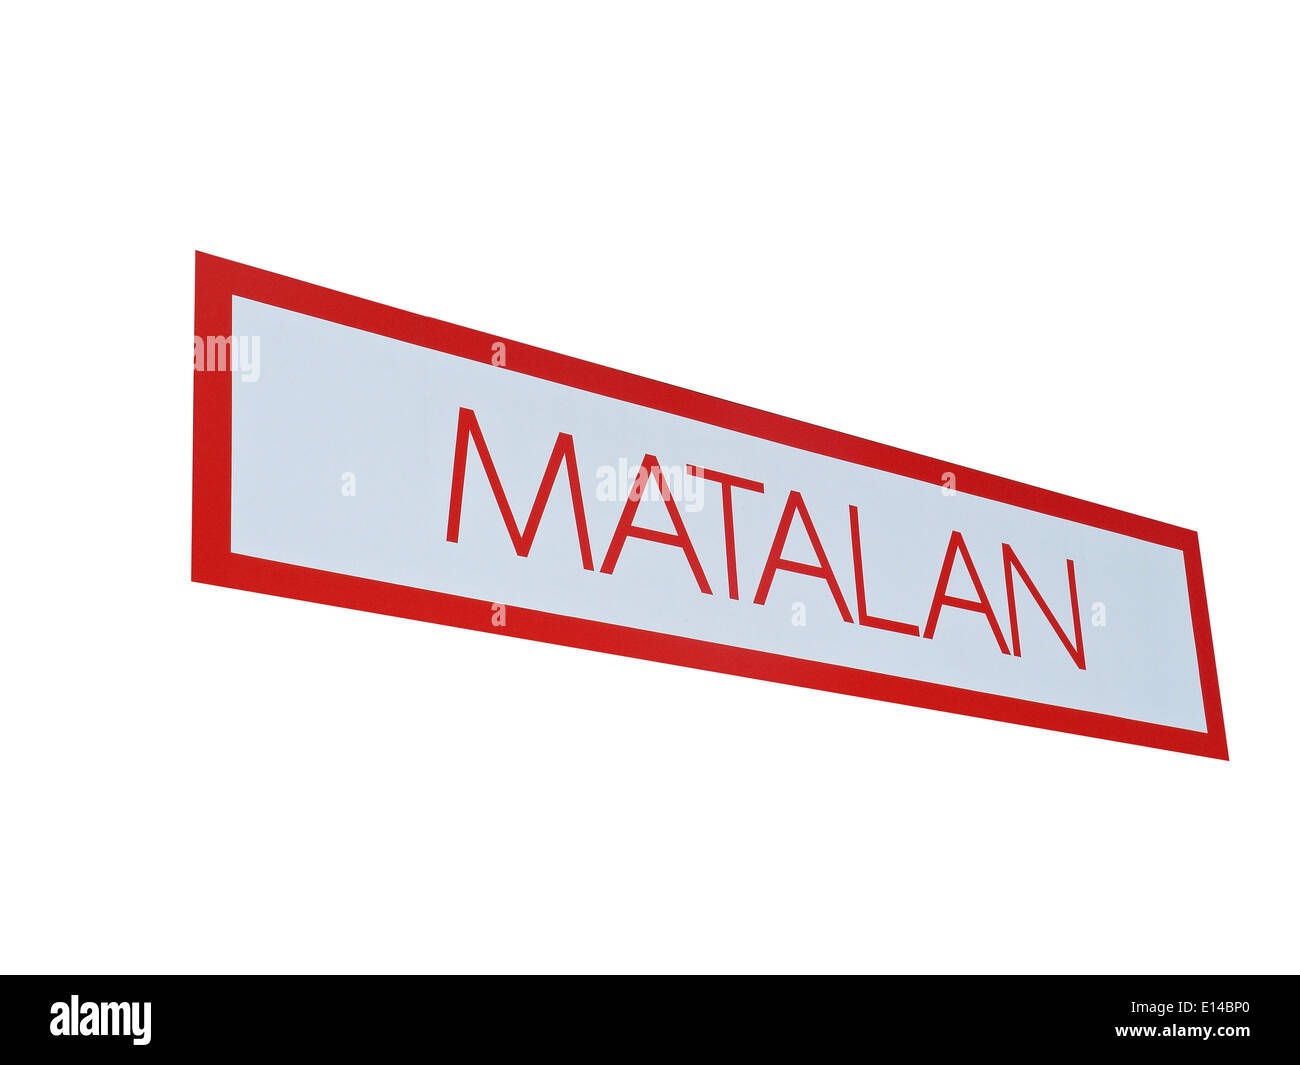 Cut out of Matalan shop sign isolated on white background UK Stock Photo